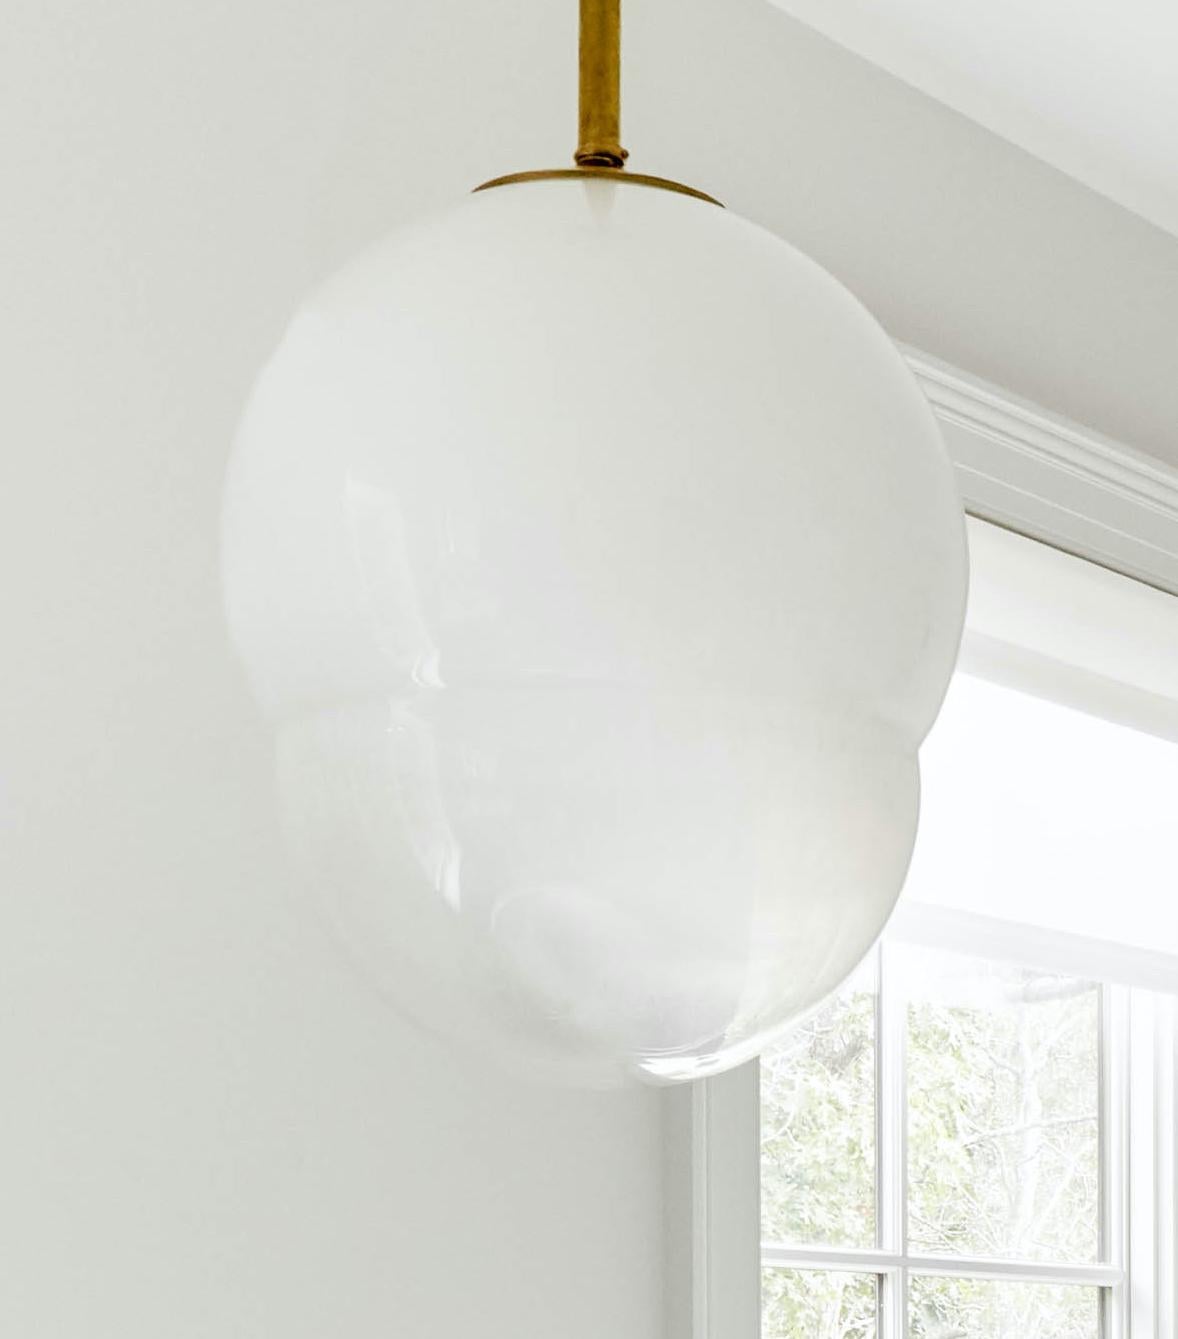 Barbini pendant light made of Murano opalescent glass and brass, circa 1970s. The ombre opalescence glass measures 20” height x 16” diameter and has an etched signature.

Images 4 - 6: Barbini Murano Opalescent Glass Pendant in situ courtesy of